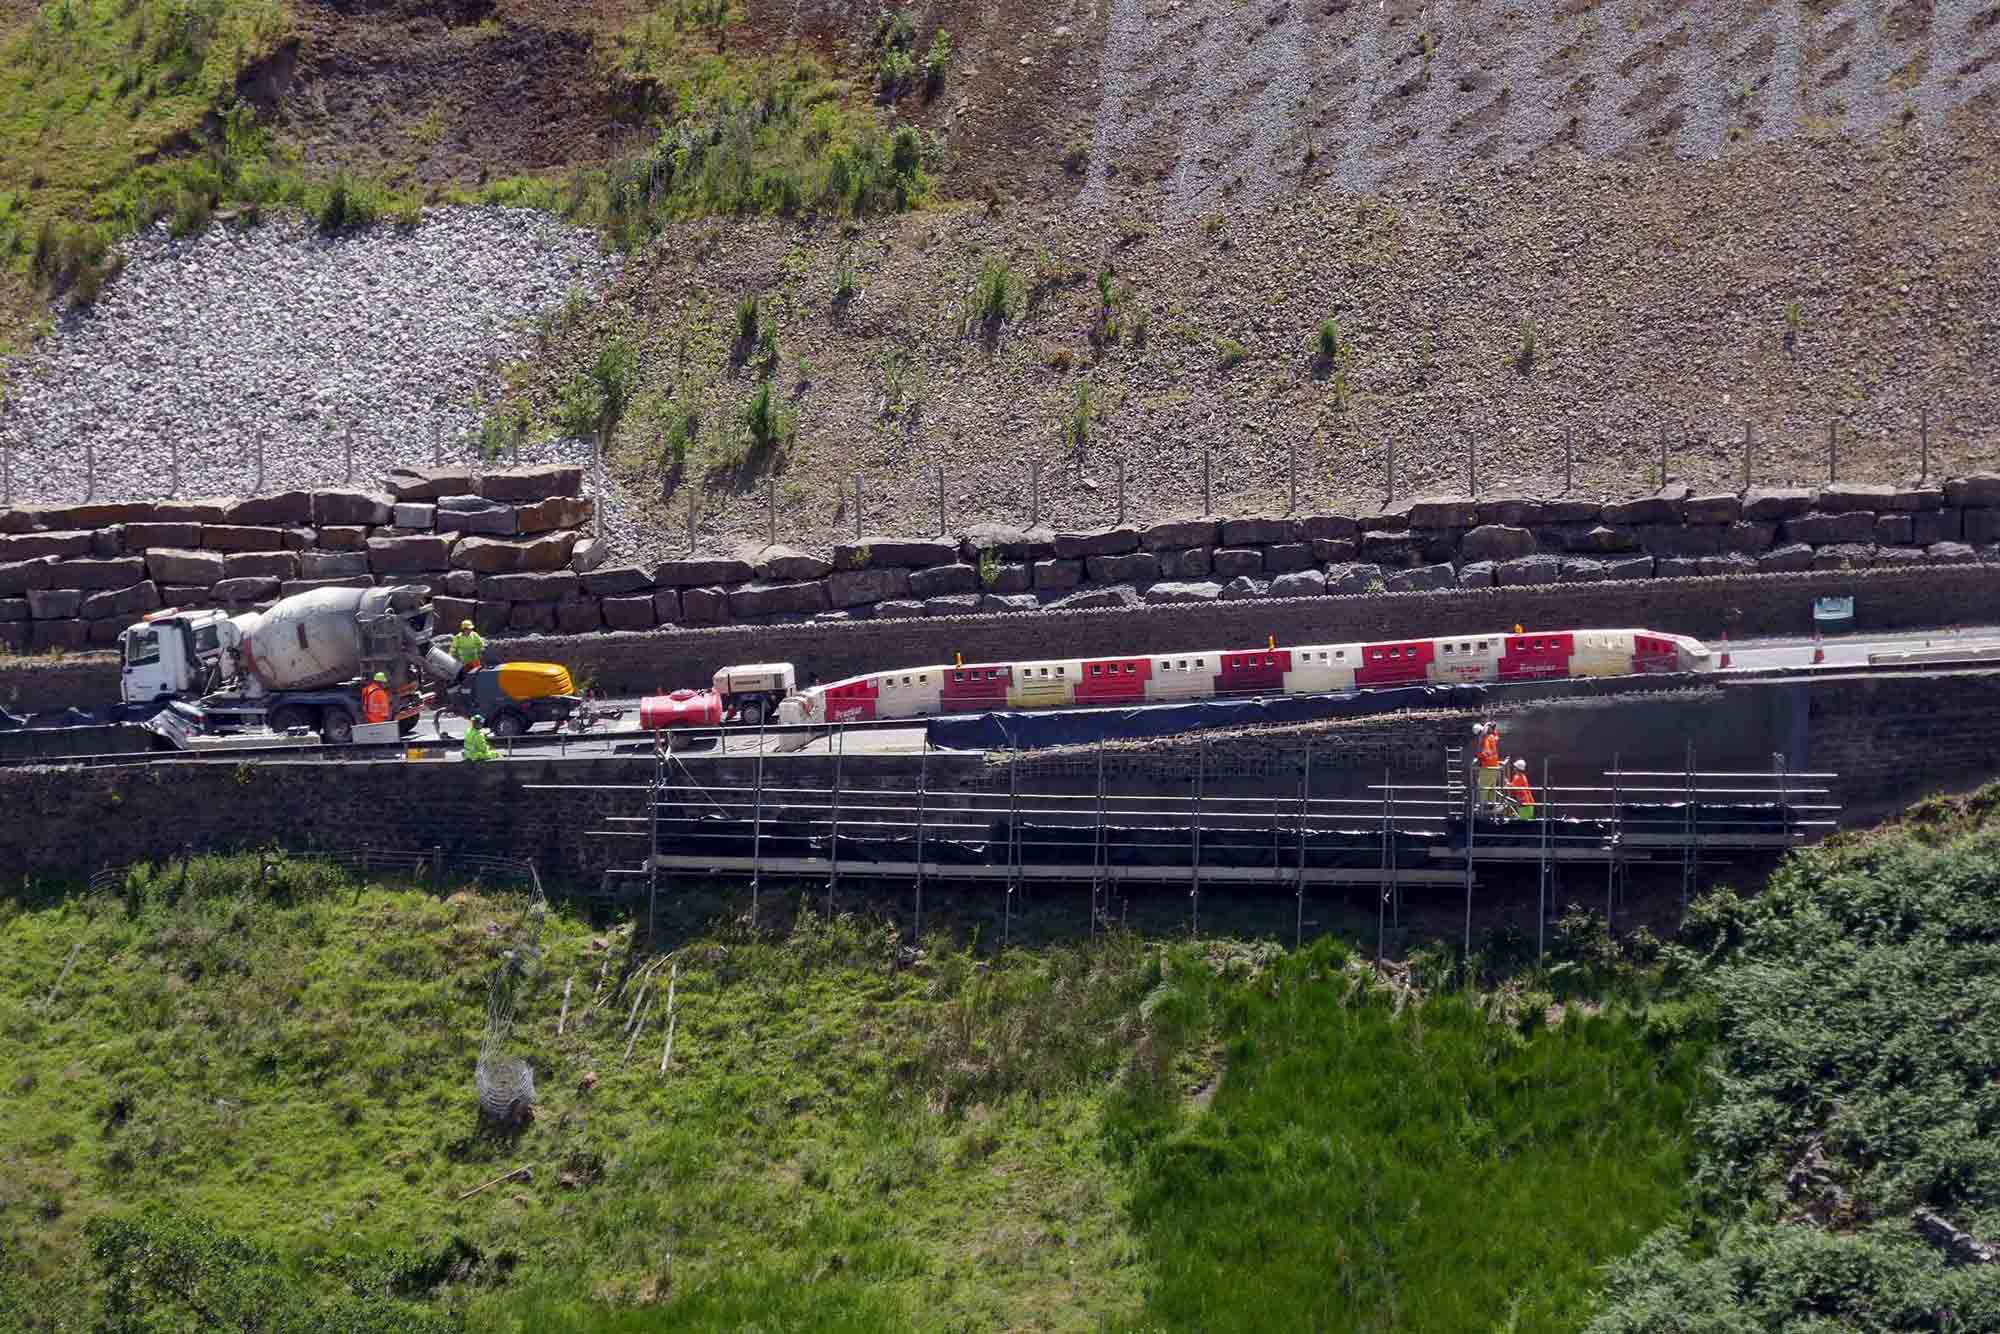 work under way last year to repair the A59 at Kex Gill after movement in the carriageway